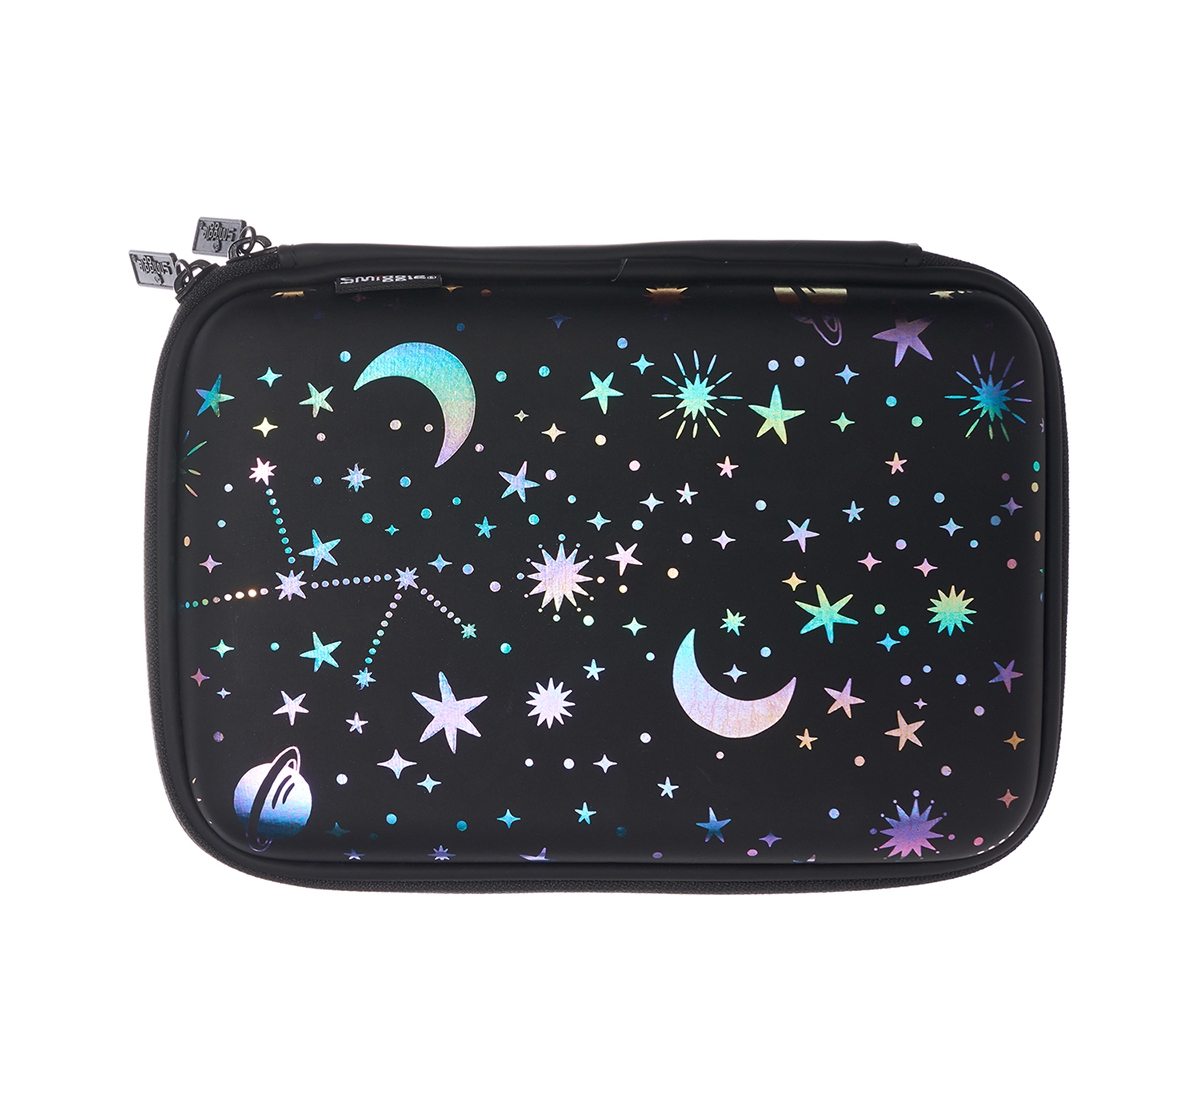 Smiggle | Smiggle Lunar Hardtop Pencil Case with Hidden Mirror - Space Print Bags for Kids age 3Y+ (Black) 1